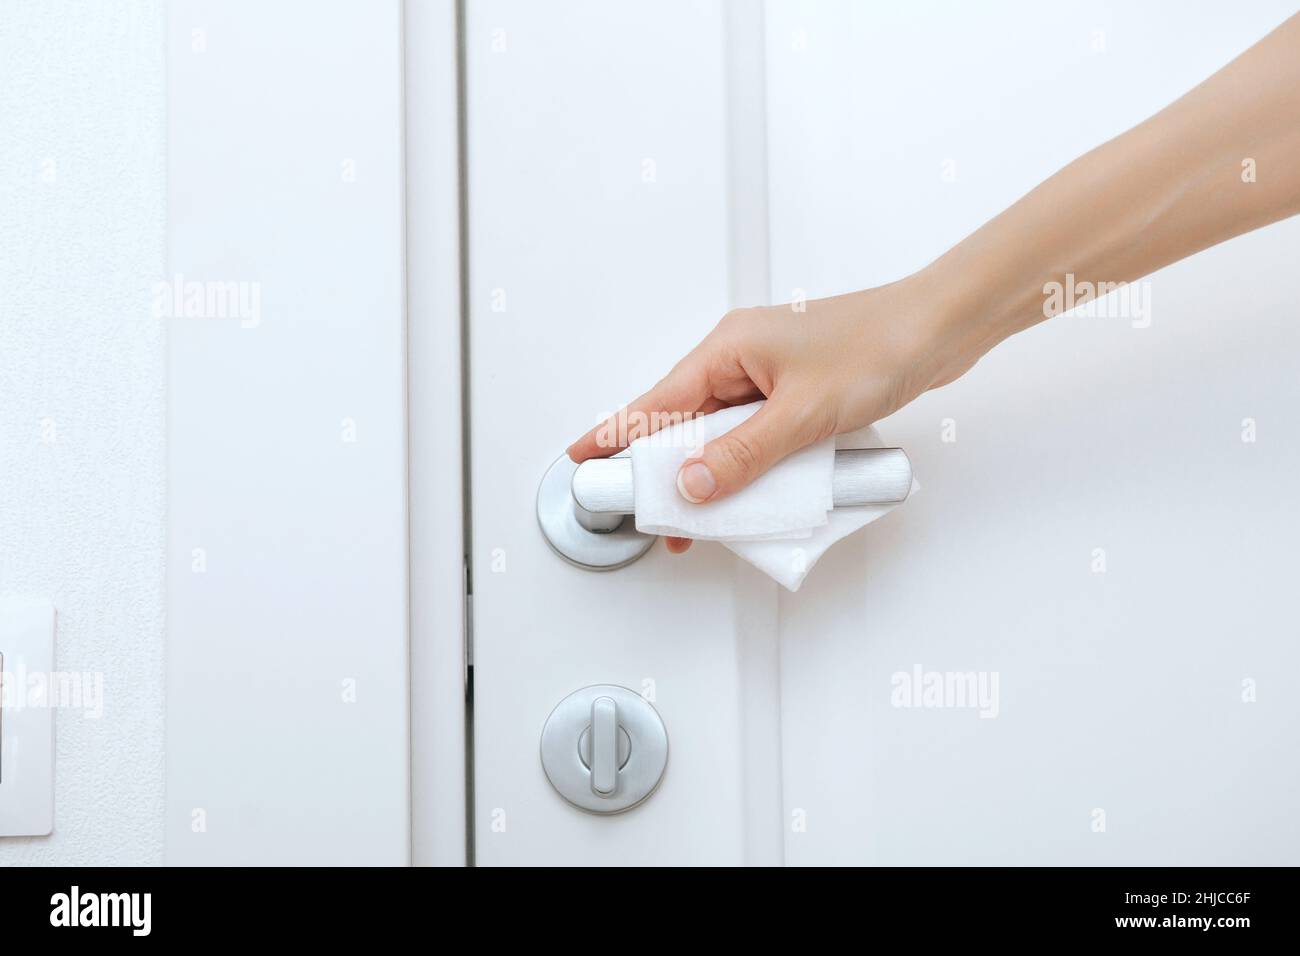 Cleaning door handles with an antiseptic wet wipe and gloves. Sanitize surfaces prevention in hospital and public spaces against corona virus. Woman Stock Photo